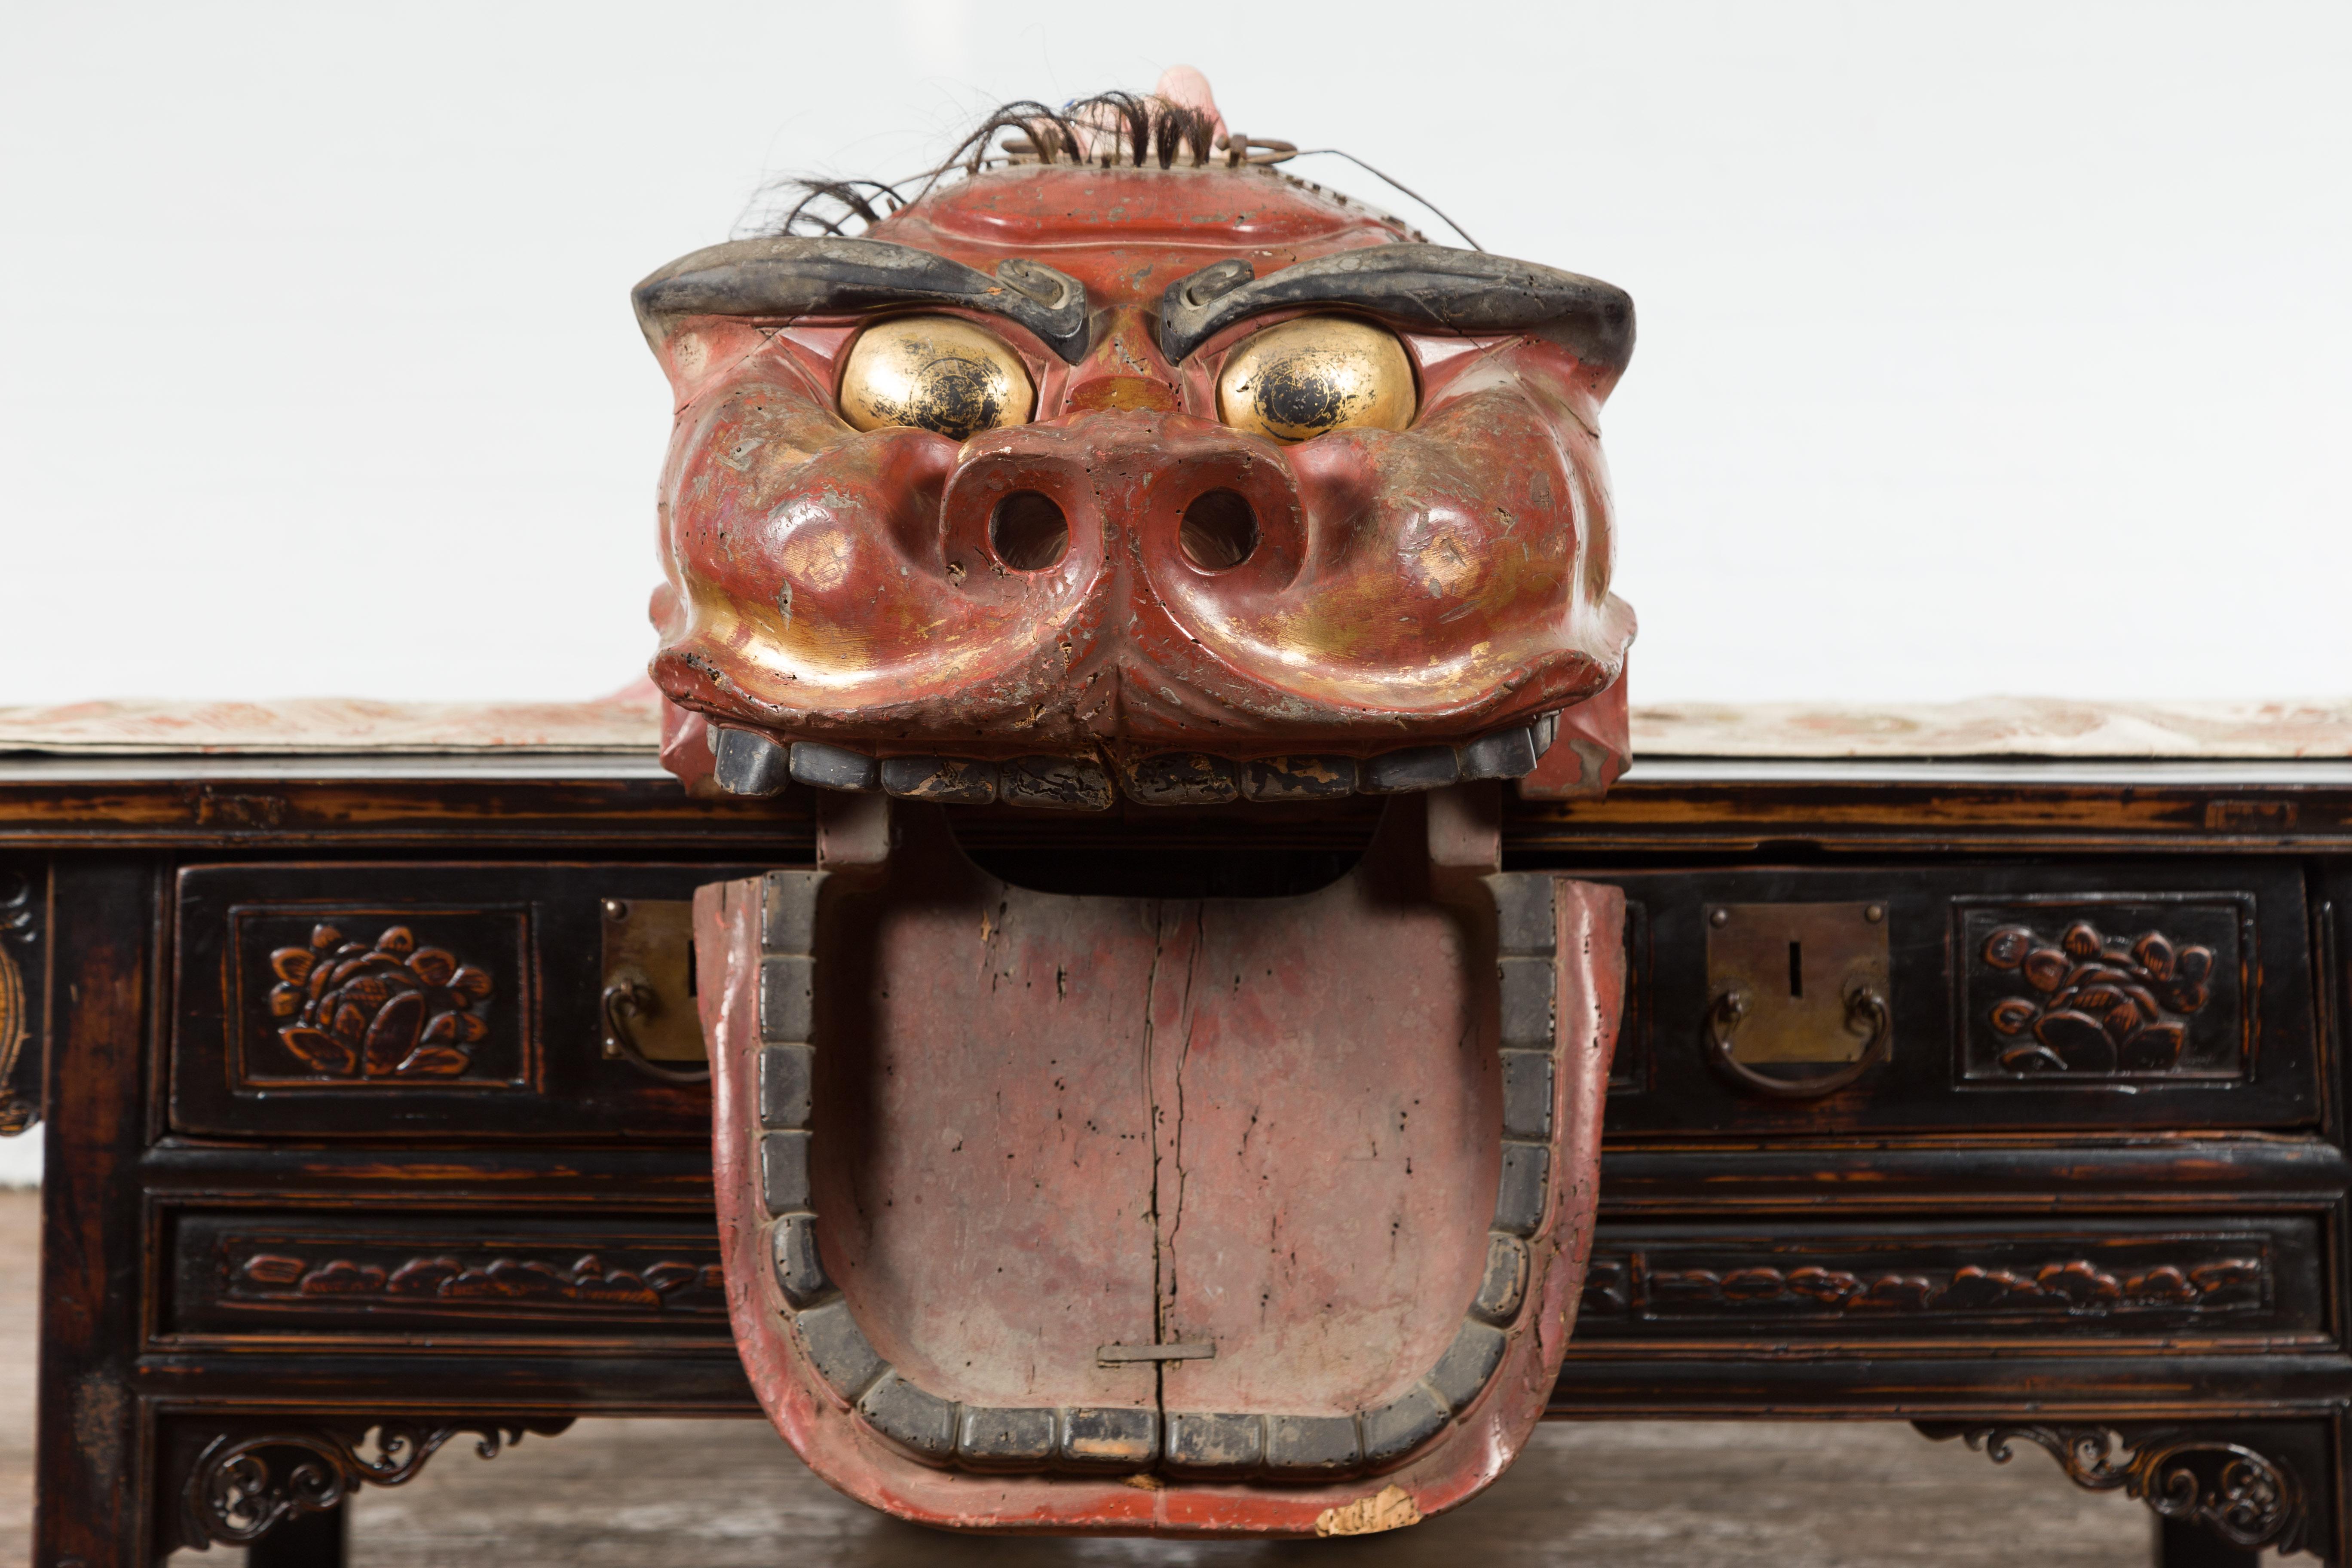 Japanese Edo Period Noh Theater Mask with Red, Black and Golden Patina For Sale 1